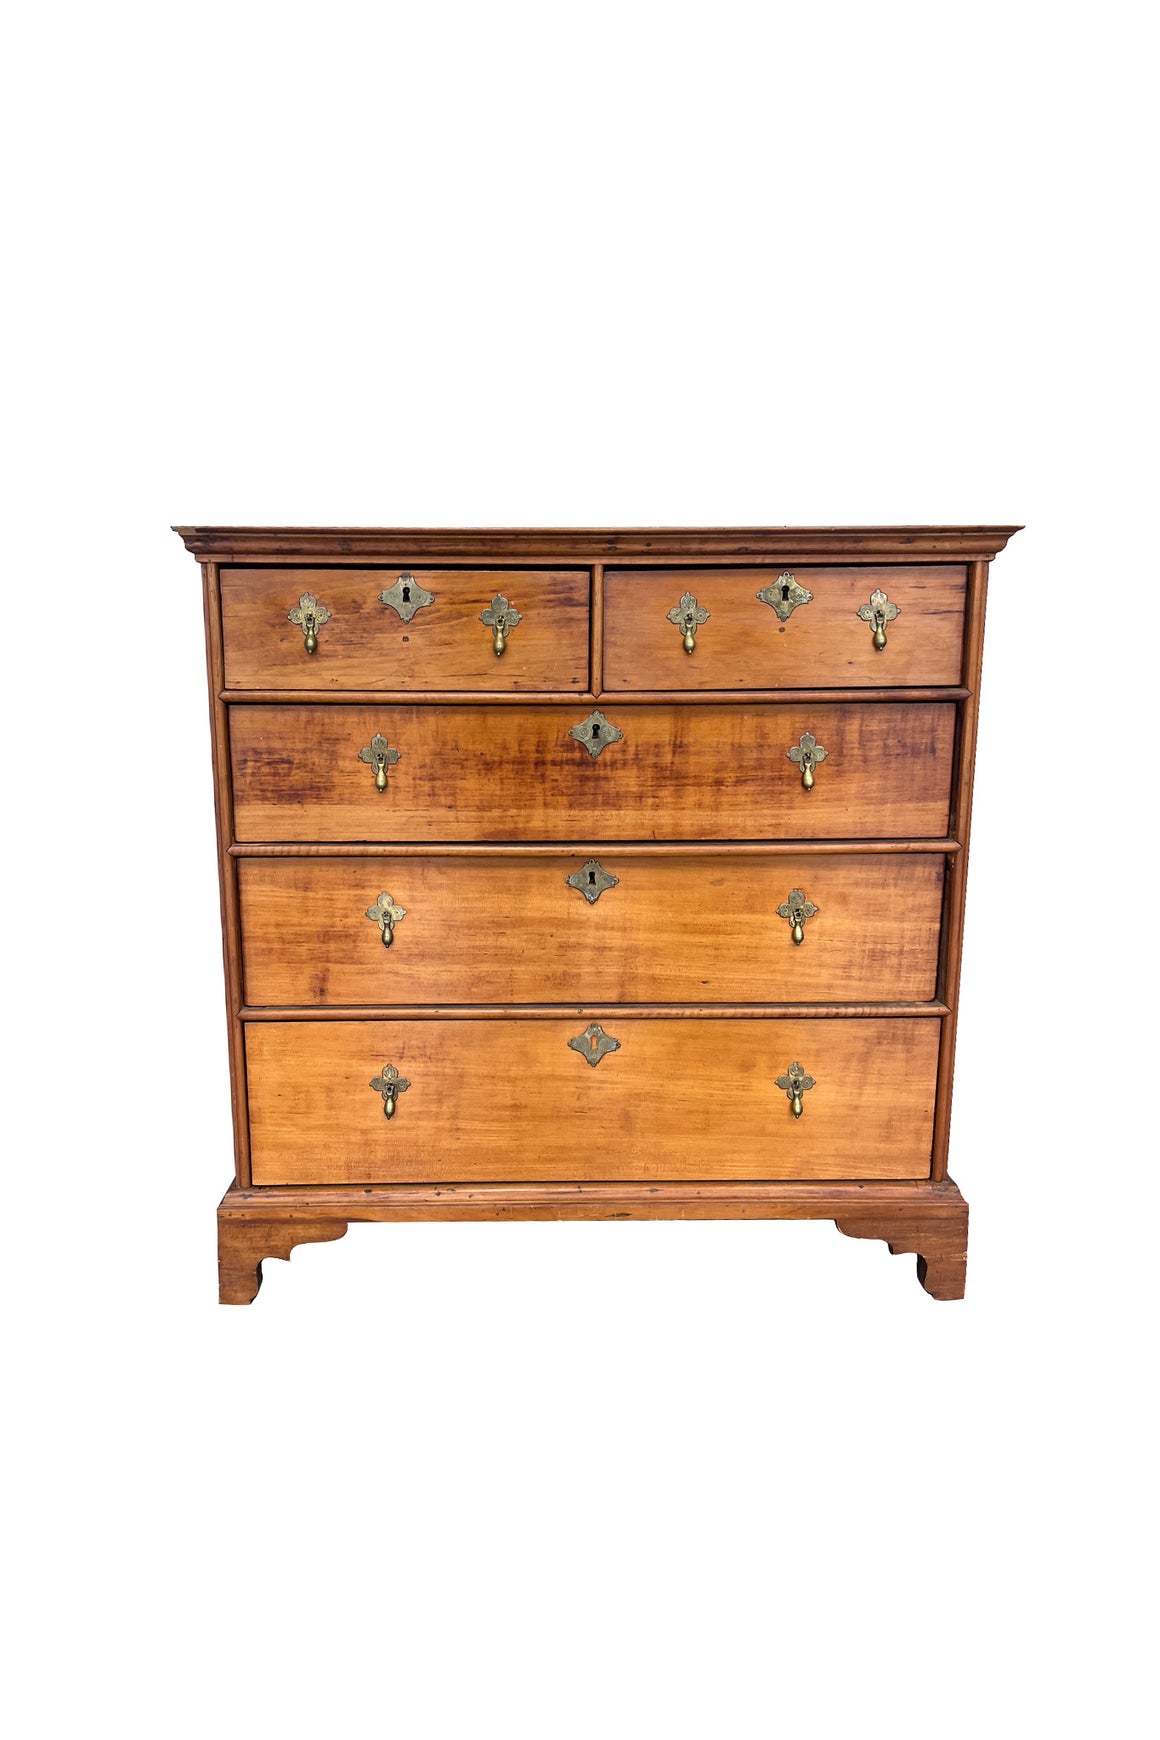 Early 18th Century Maple William & Mary 5-Drawer Chest